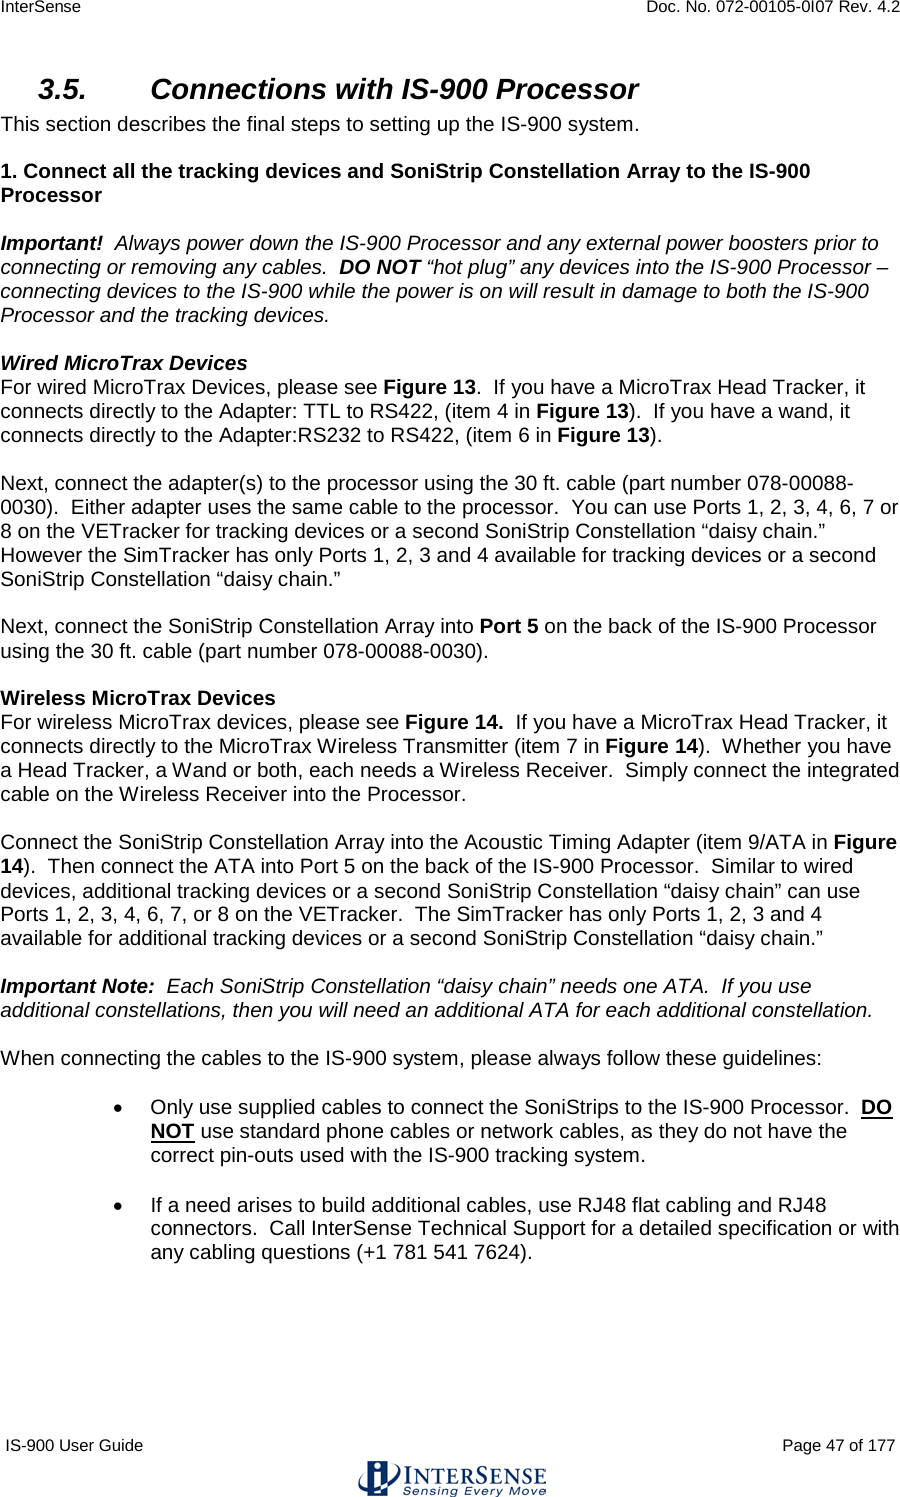 InterSense    Doc. No. 072-00105-0I07 Rev. 4.2 IS-900 User Guide                                                                                                                                          Page 47 of 177  3.5. Connections with IS-900 Processor This section describes the final steps to setting up the IS-900 system.  1. Connect all the tracking devices and SoniStrip Constellation Array to the IS-900 Processor  Important!  Always power down the IS-900 Processor and any external power boosters prior to connecting or removing any cables.  DO NOT “hot plug” any devices into the IS-900 Processor – connecting devices to the IS-900 while the power is on will result in damage to both the IS-900 Processor and the tracking devices.  Wired MicroTrax Devices For wired MicroTrax Devices, please see Figure 13.  If you have a MicroTrax Head Tracker, it connects directly to the Adapter: TTL to RS422, (item 4 in Figure 13).  If you have a wand, it connects directly to the Adapter:RS232 to RS422, (item 6 in Figure 13).     Next, connect the adapter(s) to the processor using the 30 ft. cable (part number 078-00088-0030).  Either adapter uses the same cable to the processor.  You can use Ports 1, 2, 3, 4, 6, 7 or 8 on the VETracker for tracking devices or a second SoniStrip Constellation “daisy chain.”  However the SimTracker has only Ports 1, 2, 3 and 4 available for tracking devices or a second SoniStrip Constellation “daisy chain.”  Next, connect the SoniStrip Constellation Array into Port 5 on the back of the IS-900 Processor using the 30 ft. cable (part number 078-00088-0030).    Wireless MicroTrax Devices For wireless MicroTrax devices, please see Figure 14.  If you have a MicroTrax Head Tracker, it connects directly to the MicroTrax Wireless Transmitter (item 7 in Figure 14).  Whether you have a Head Tracker, a Wand or both, each needs a Wireless Receiver.  Simply connect the integrated cable on the Wireless Receiver into the Processor.  Connect the SoniStrip Constellation Array into the Acoustic Timing Adapter (item 9/ATA in Figure 14).  Then connect the ATA into Port 5 on the back of the IS-900 Processor.  Similar to wired devices, additional tracking devices or a second SoniStrip Constellation “daisy chain” can use Ports 1, 2, 3, 4, 6, 7, or 8 on the VETracker.  The SimTracker has only Ports 1, 2, 3 and 4 available for additional tracking devices or a second SoniStrip Constellation “daisy chain.”  Important Note:  Each SoniStrip Constellation “daisy chain” needs one ATA.  If you use additional constellations, then you will need an additional ATA for each additional constellation.  When connecting the cables to the IS-900 system, please always follow these guidelines:  • Only use supplied cables to connect the SoniStrips to the IS-900 Processor.  DO NOT use standard phone cables or network cables, as they do not have the correct pin-outs used with the IS-900 tracking system.   • If a need arises to build additional cables, use RJ48 flat cabling and RJ48 connectors.  Call InterSense Technical Support for a detailed specification or with any cabling questions (+1 781 541 7624).     